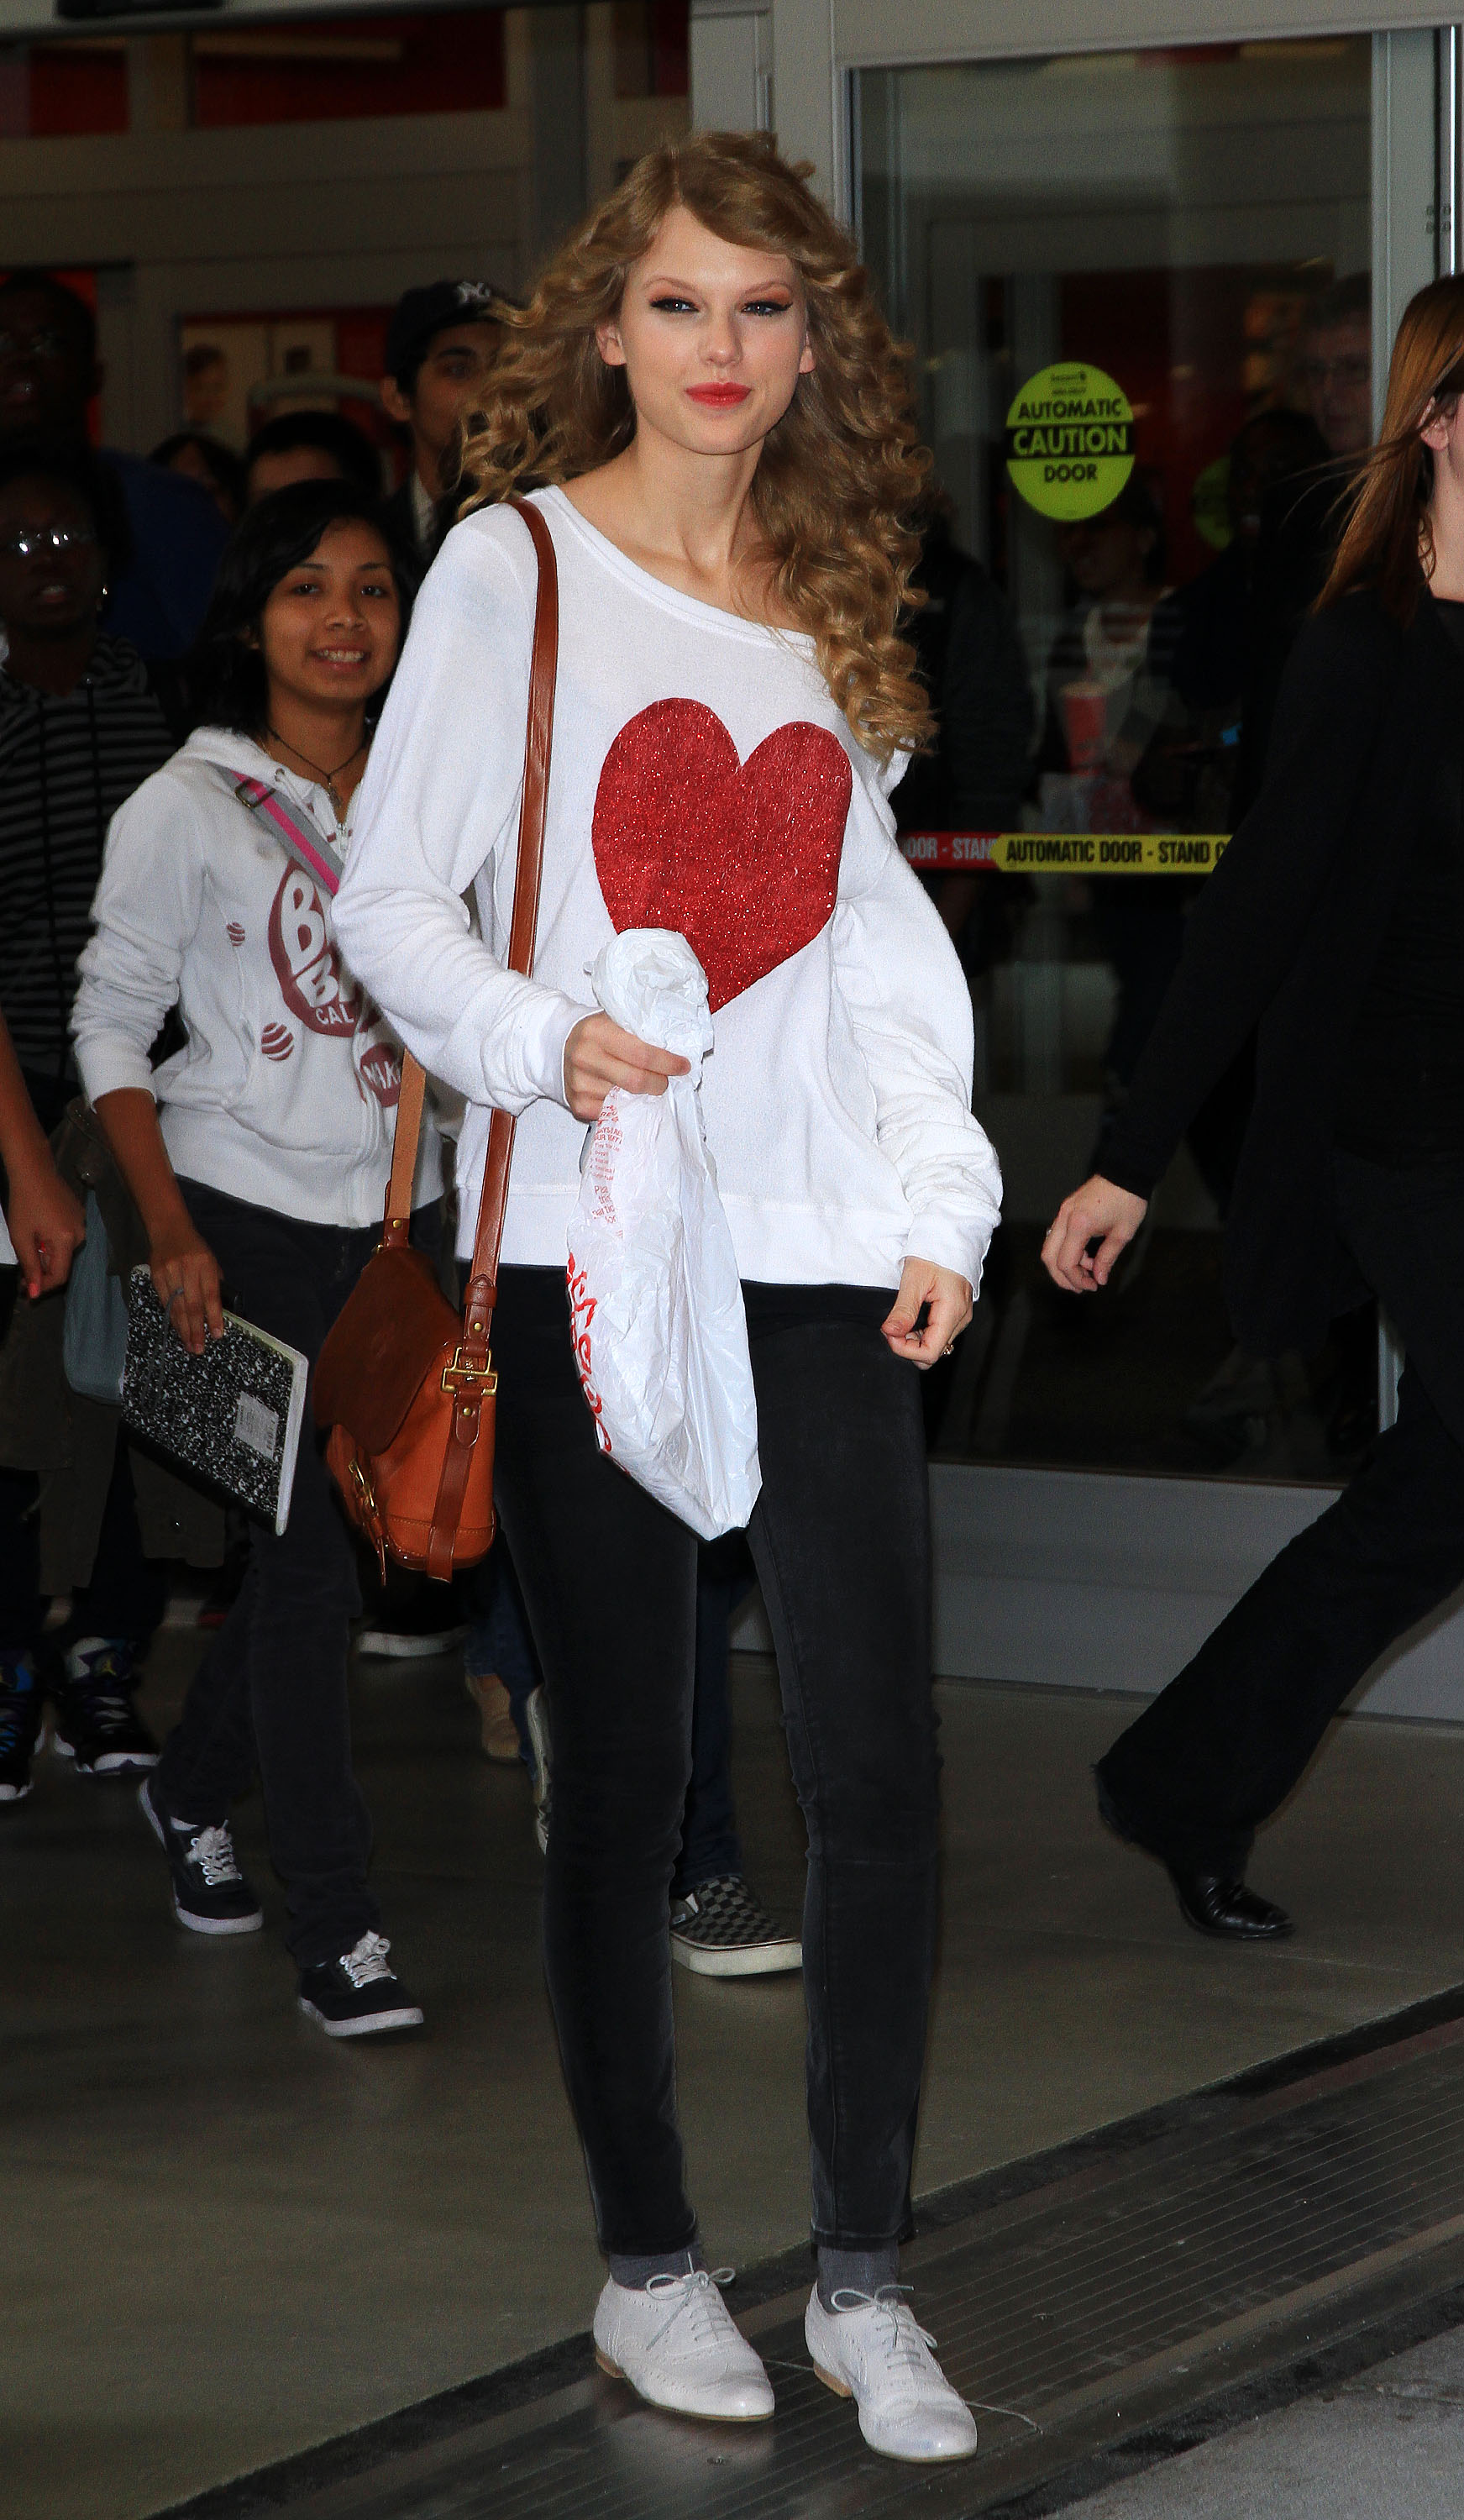 Taylor Swift Buying her album at Target in New York City October 25, 2010 | TAYLOR ...